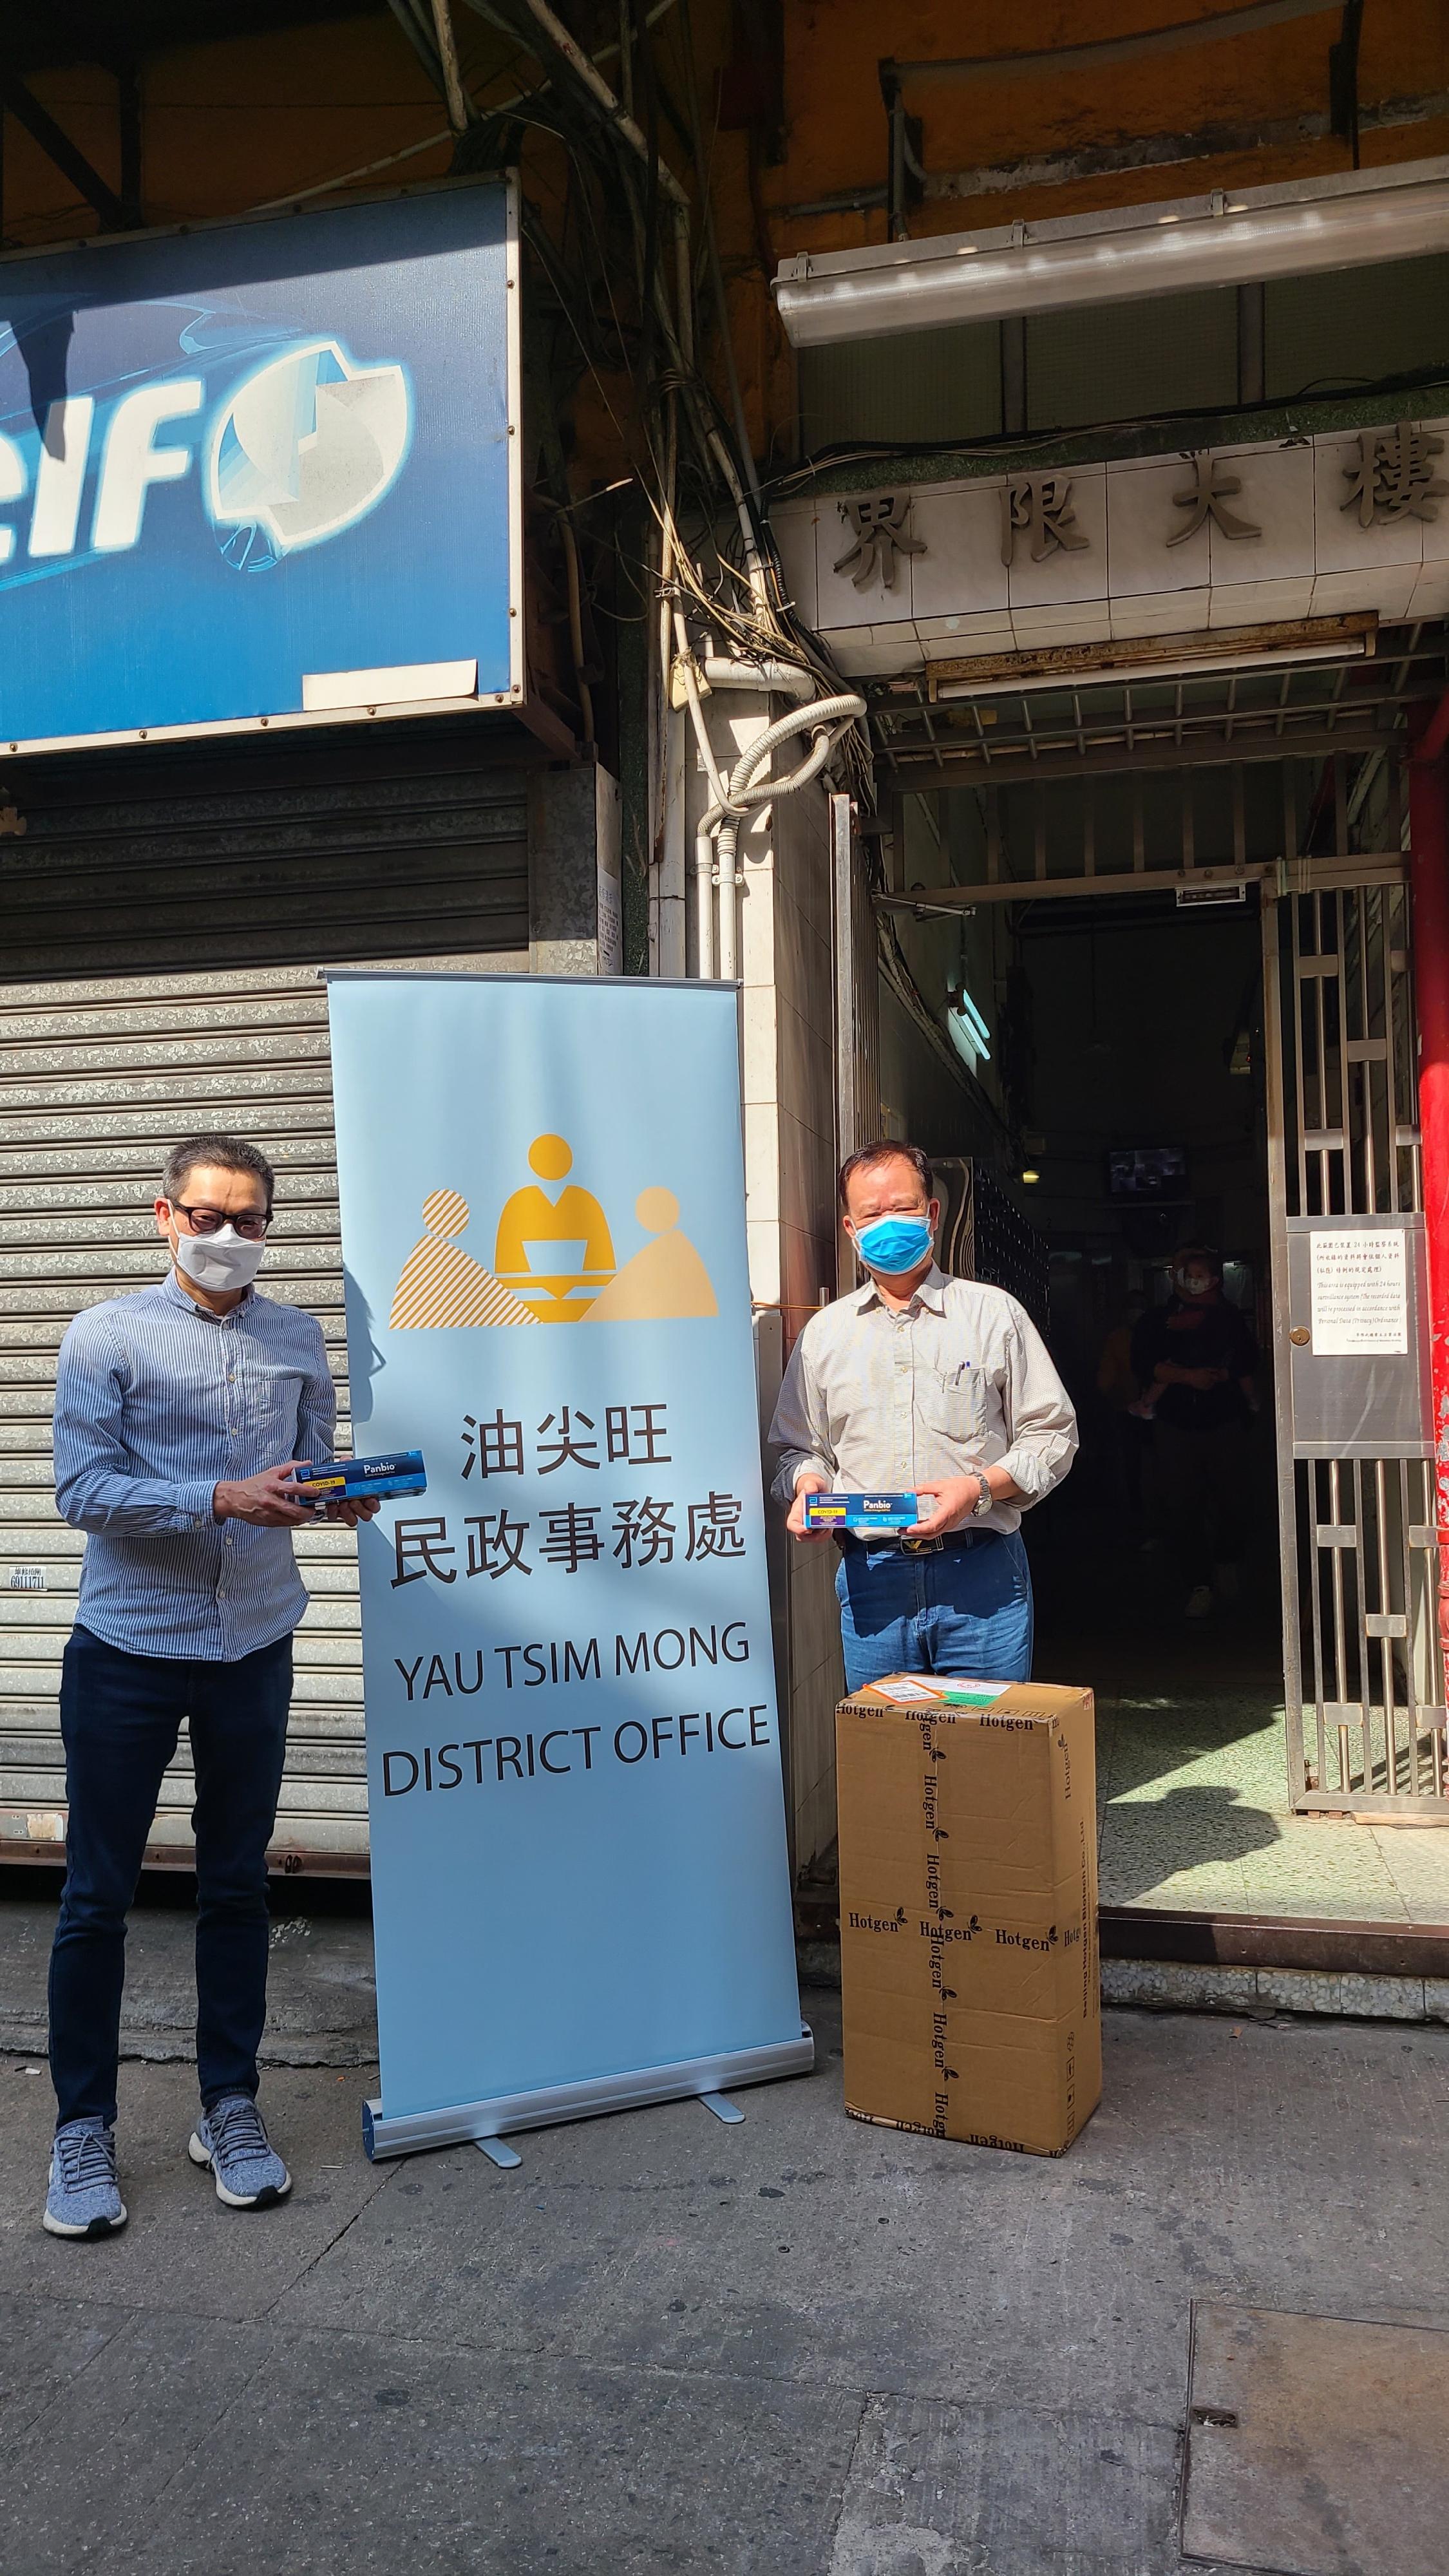 The Yau Tsim Mong District Office distributed COVID-19 rapid test kits to households, cleansing workers and property management staff living and working in Boundary Building for voluntary testing through the owners' corporation.